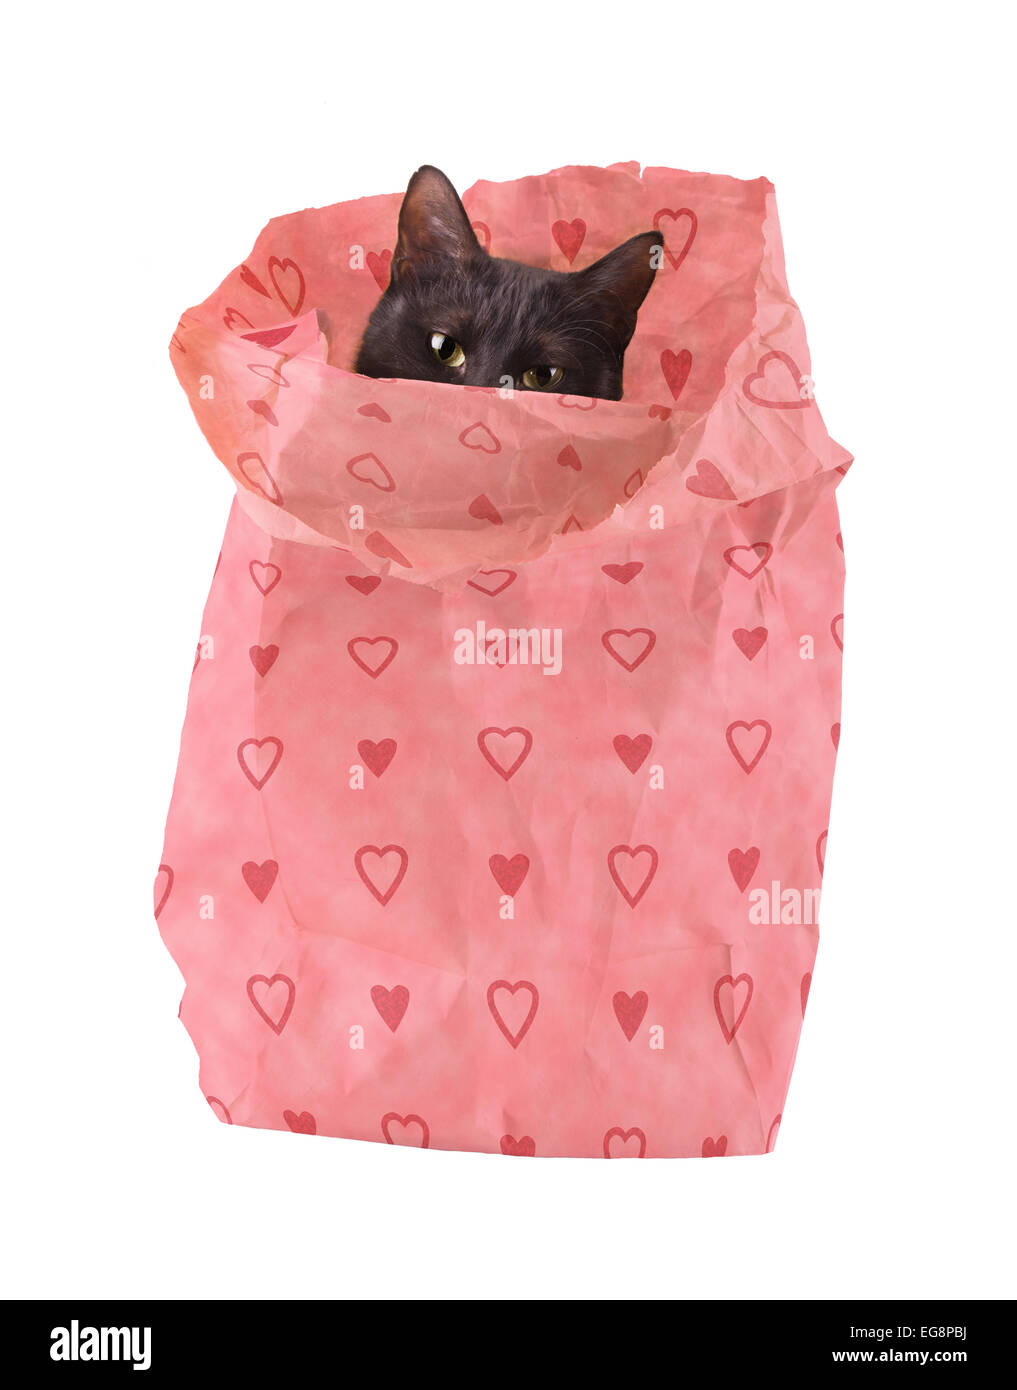 Bagful of love - a black cat peeking out of a paper bag decorated with pink hearts  - a new Valentine's friend Stock Photo